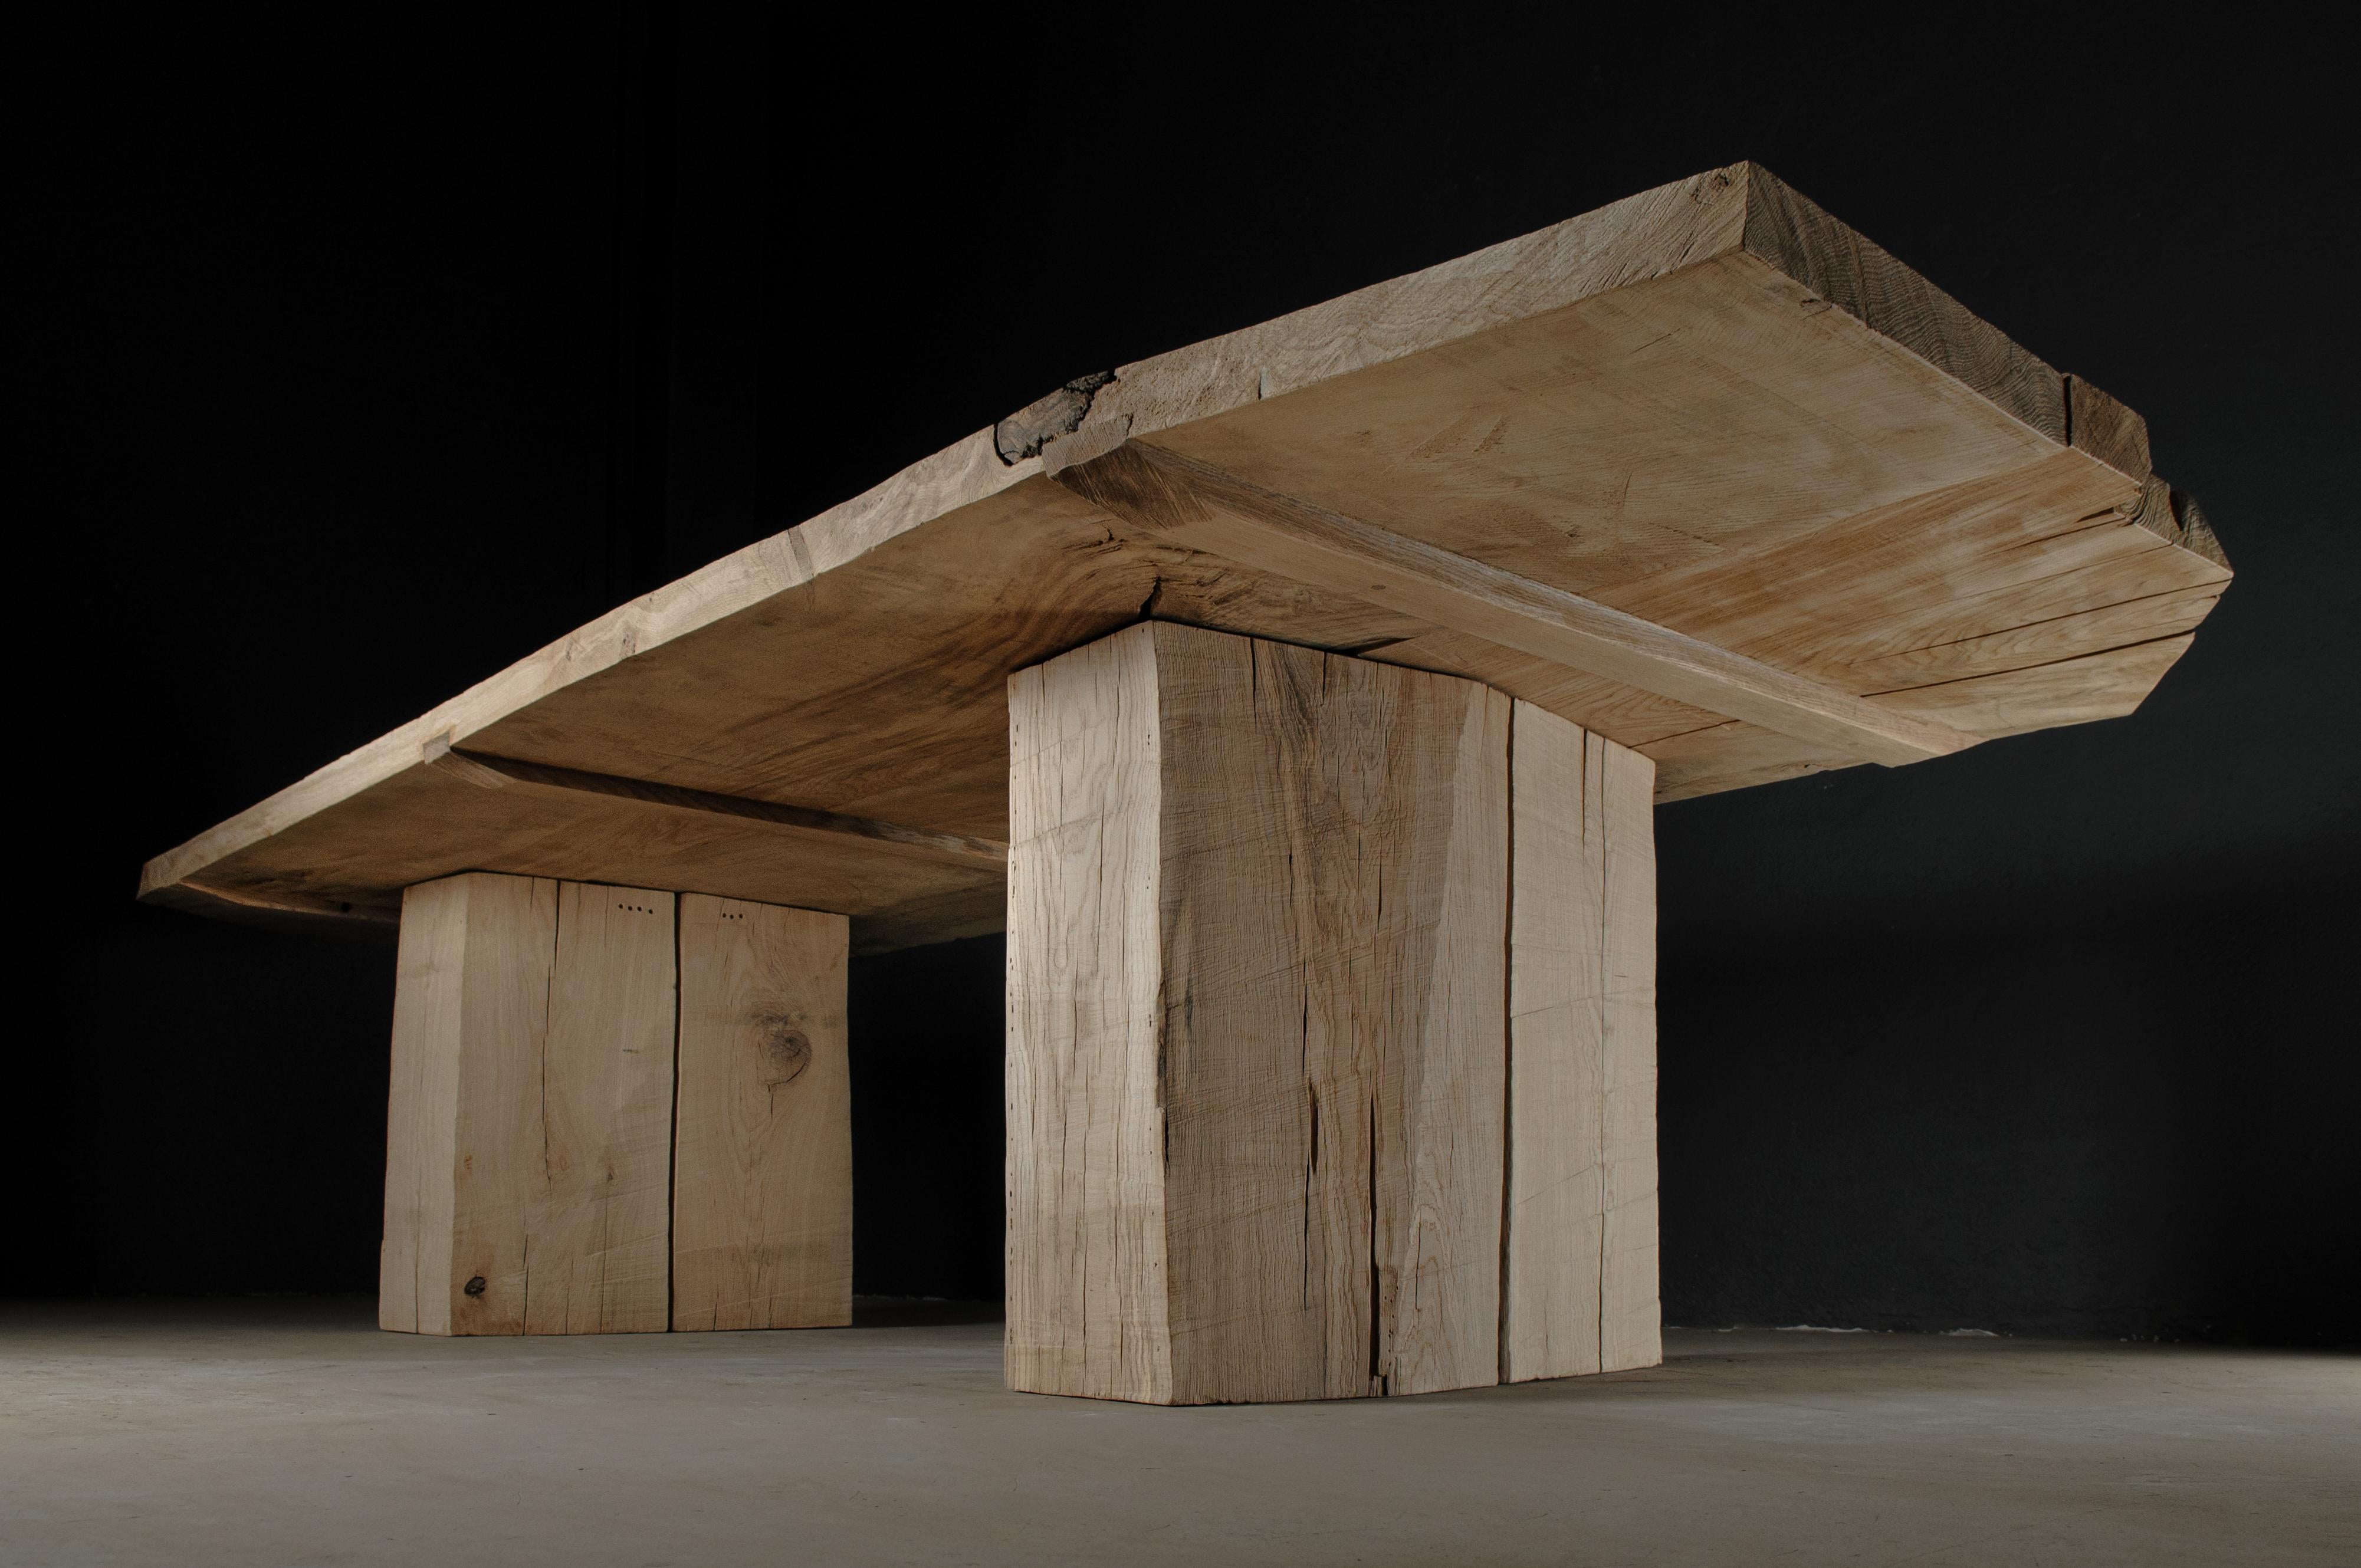 Massive dining table made of solid oak (+ linseed oil)
(Outdoor use OK)

Model shown :
Measures: 310 cm x 122 cm x 79 cm

Warm furniture’s made by Denis Milovanov, founder of 'Soha Concept' design studio. Simplicity of shapes. Authentic